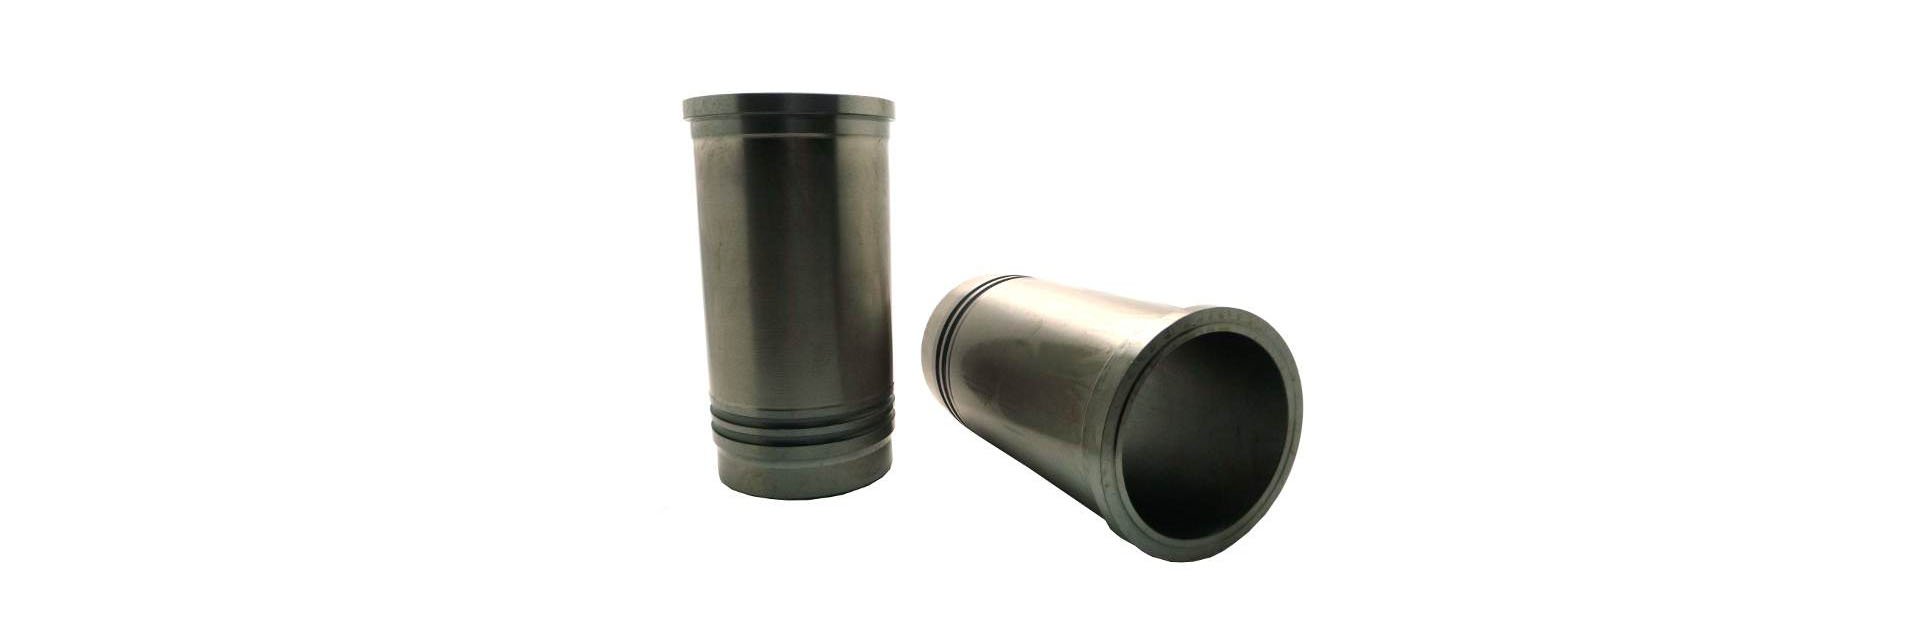 Cylinder liners and complete sets